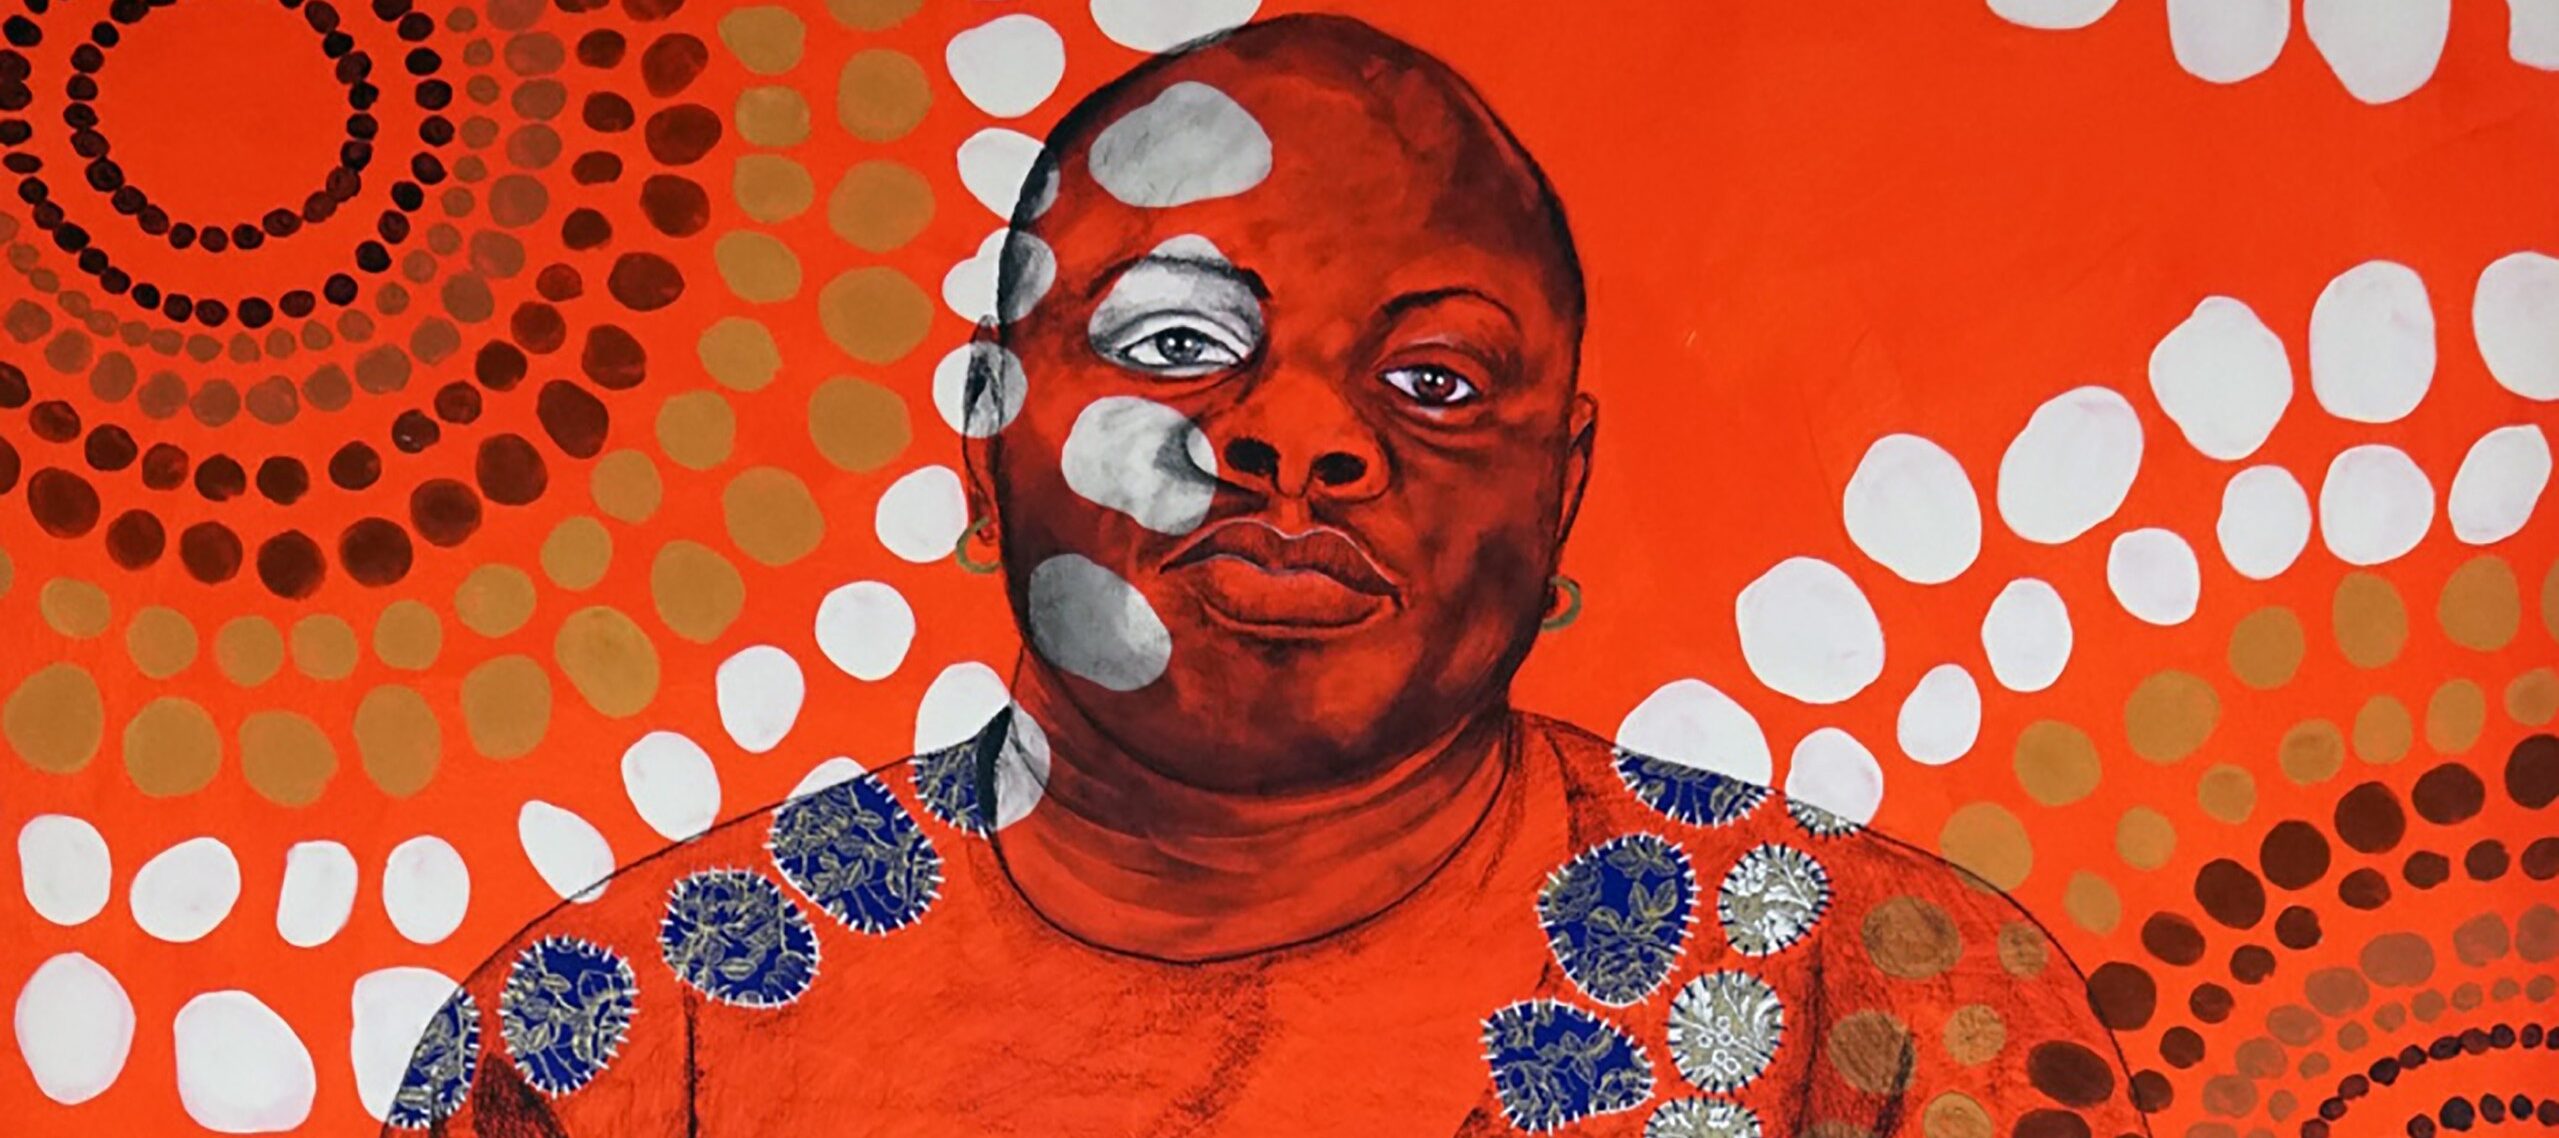 Delita Martin, <em>Believing in Kings</em>, 2018; Acrylic, charcoal, relief printing, decorative papers, hand-stitching, and liquid gold leaf on paper, 71 1/2 x 51 in.; National Museum of Women in the Arts, Museum Purchase, Belinda de Gaudemar Acquisition Fund; Photo by Joshua Asante